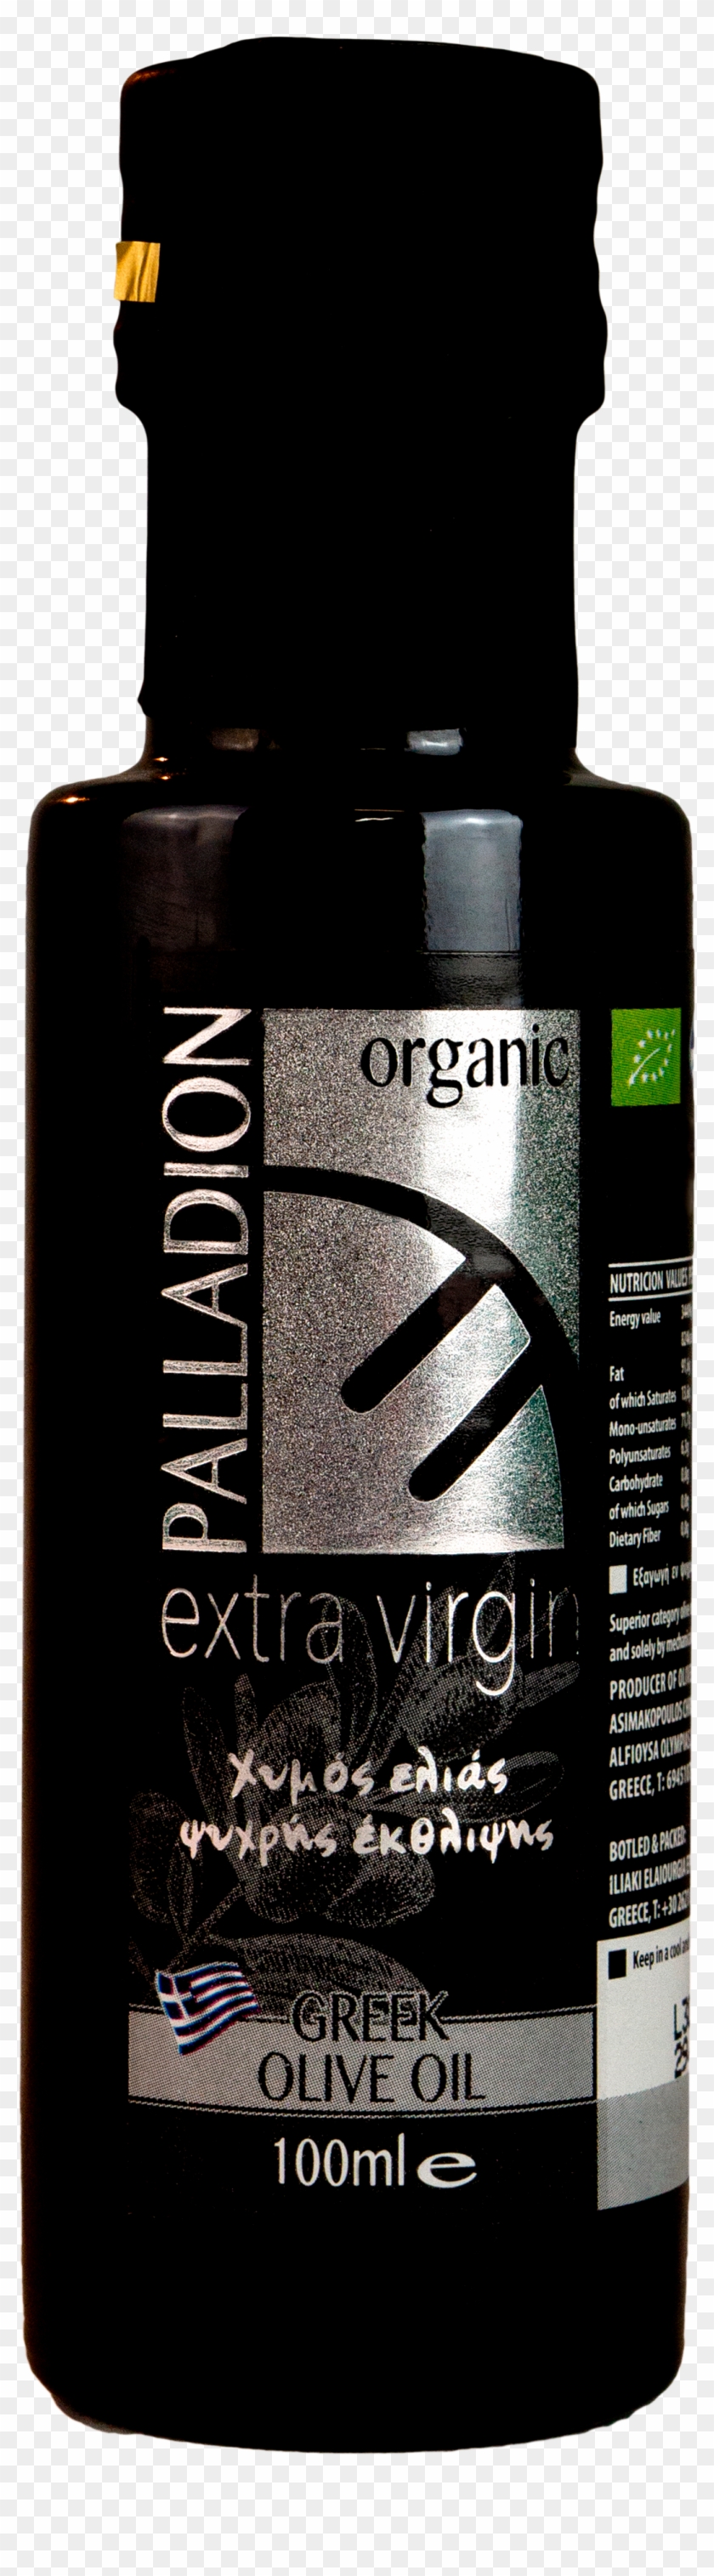 Palladion Extra Virgin Olive Oil - Cosmetics Clipart #2455892